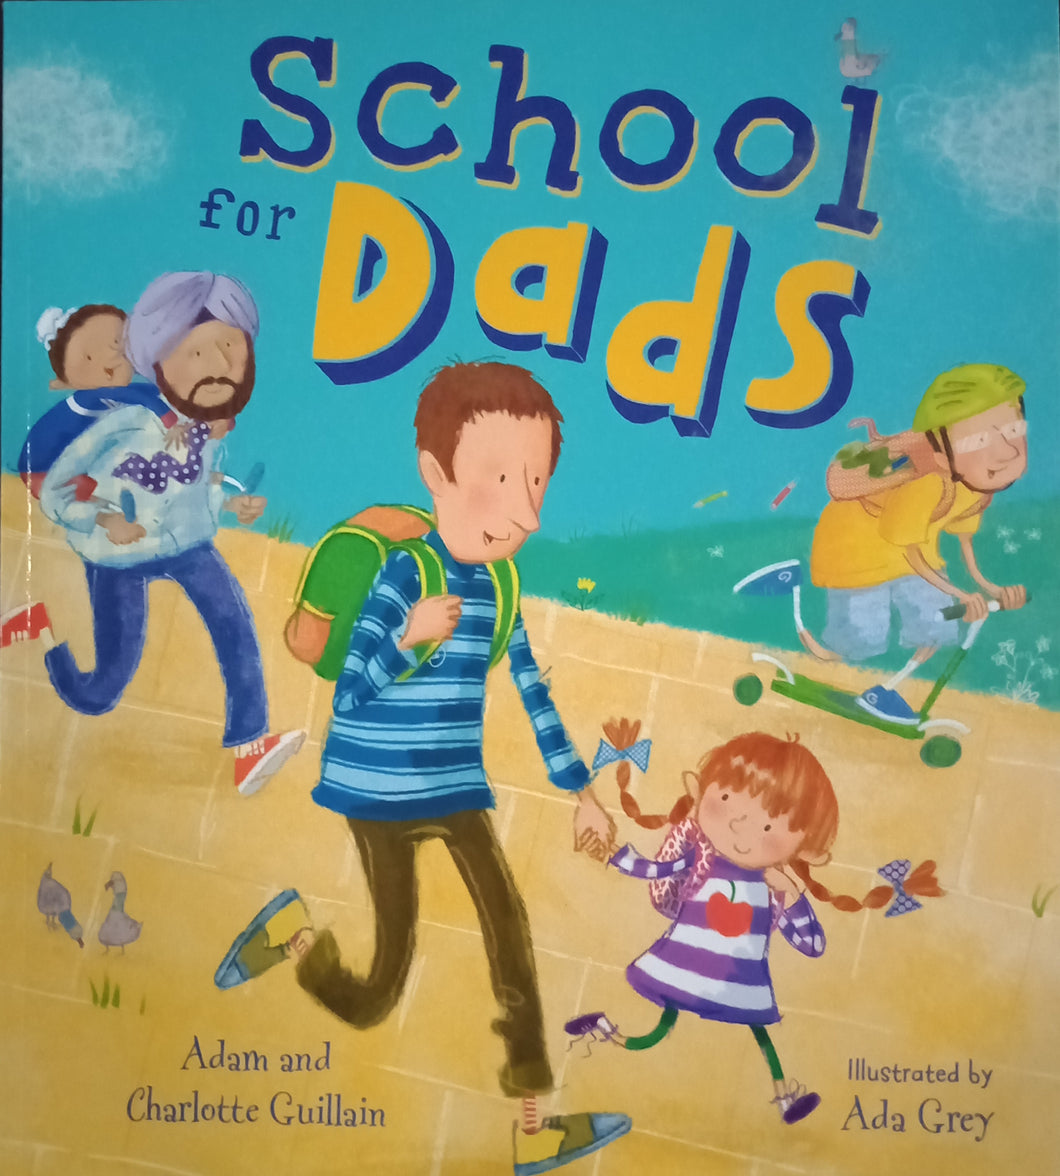 School For Dads by Adam & Charlotte Guillain